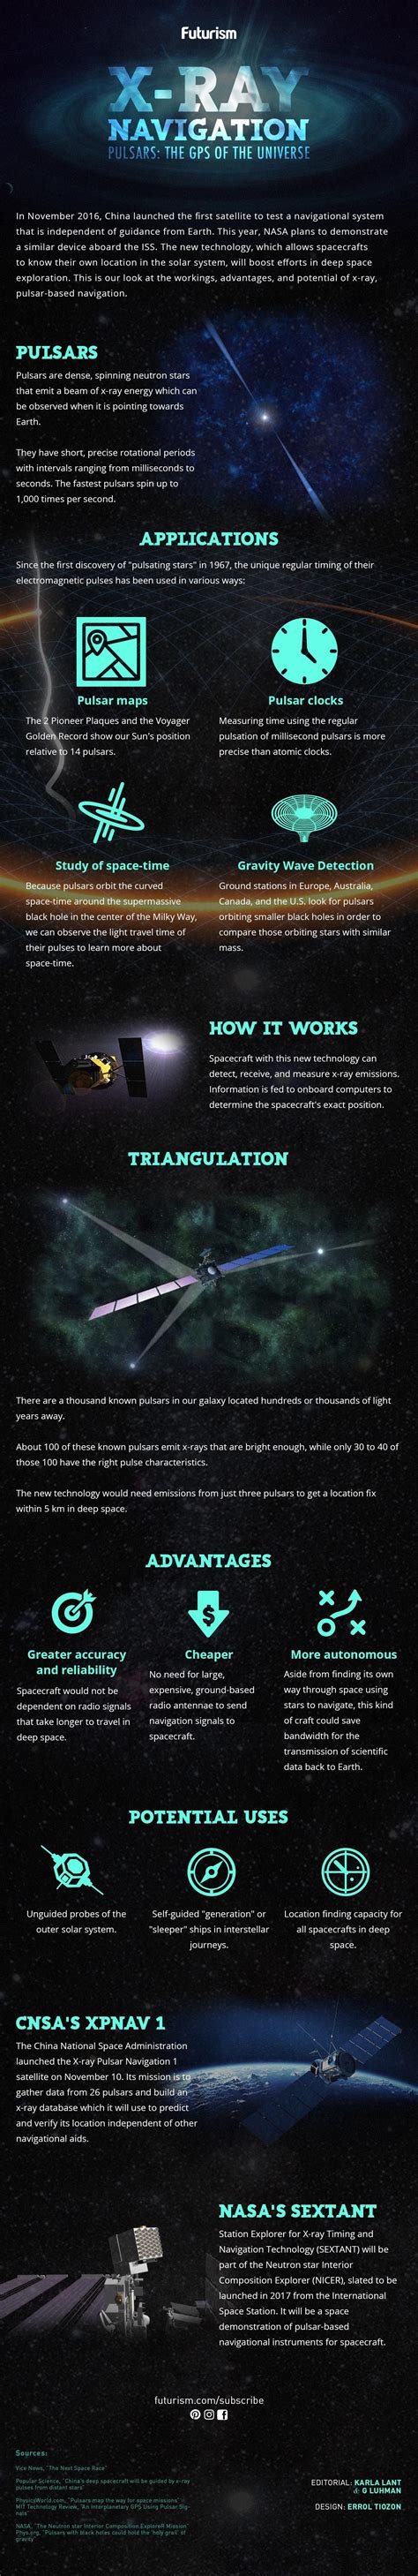 X-Ray Navigation: Pulsars, The GPS of the Universe | Space and astronomy, Astronomy facts, Astronomy